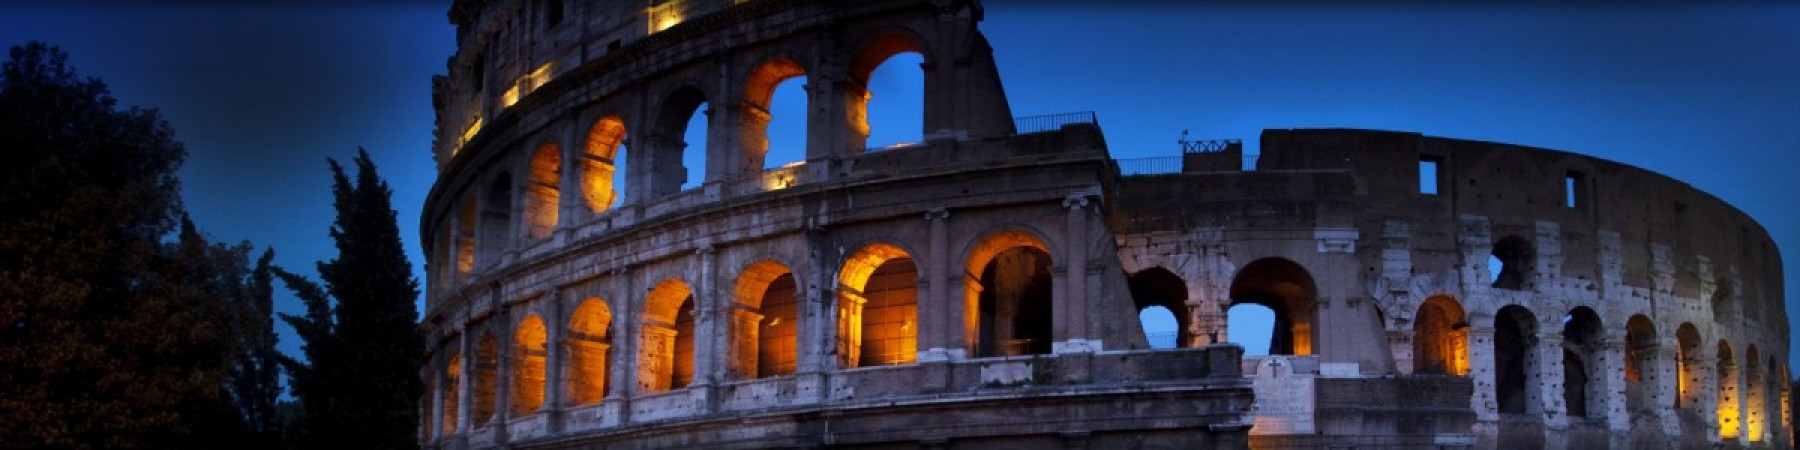 Platinum Card - Amazing nights at the Colosseum